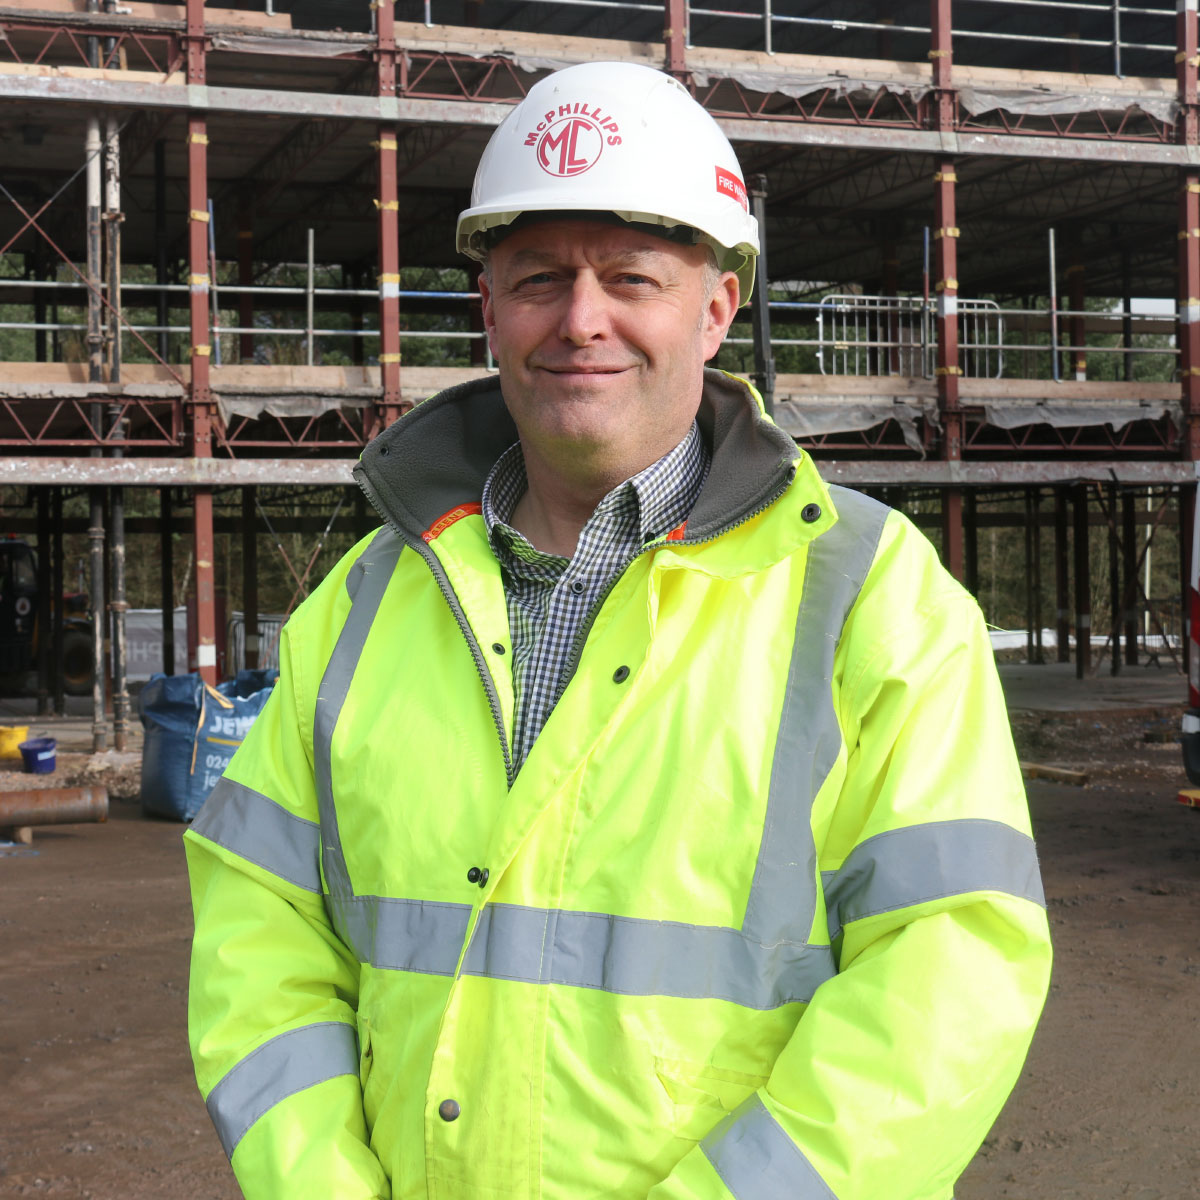 As the work at #Telford Central Fire Station moves into a new phase of construction in March, @shropsfire spoke with McPhillips’ Site Manager Neil Surridge to hear about the current stage of the build and how it’s going (1/8)